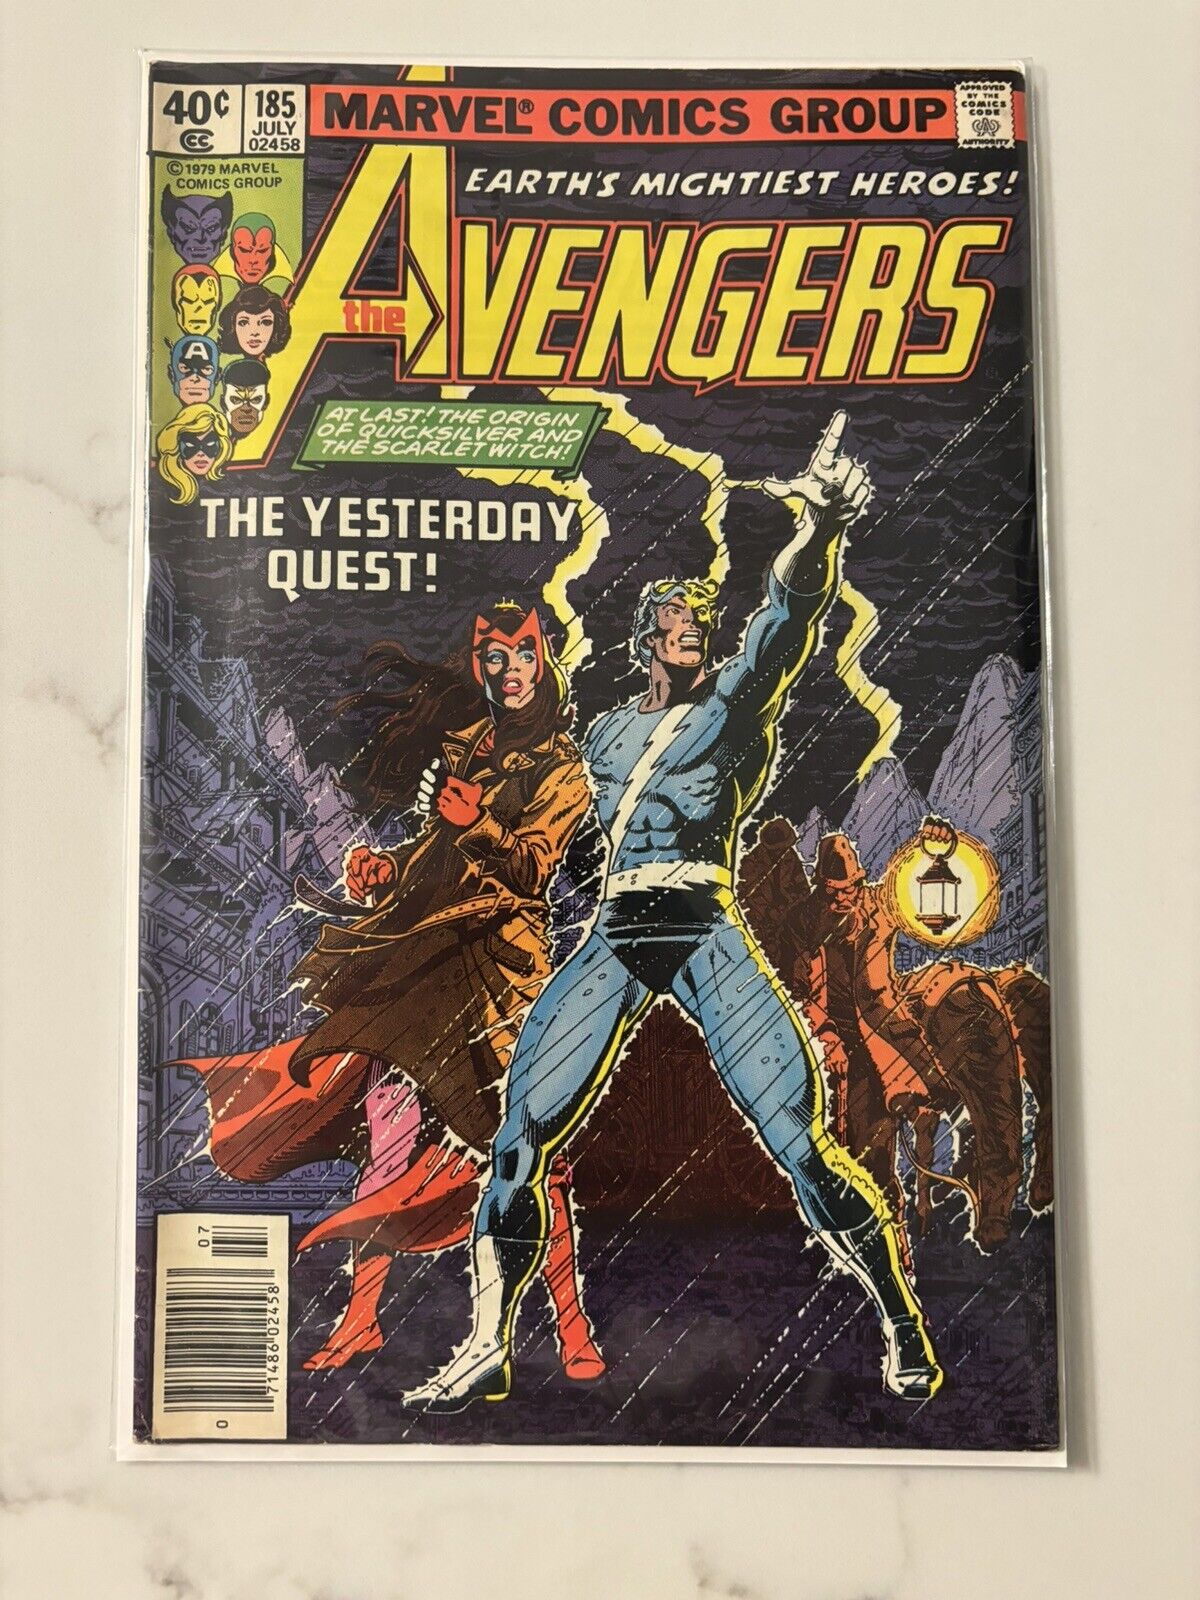 1979 The Avengers #185 Marvel Comics 1st Series Newsstand The Yesterday Quest